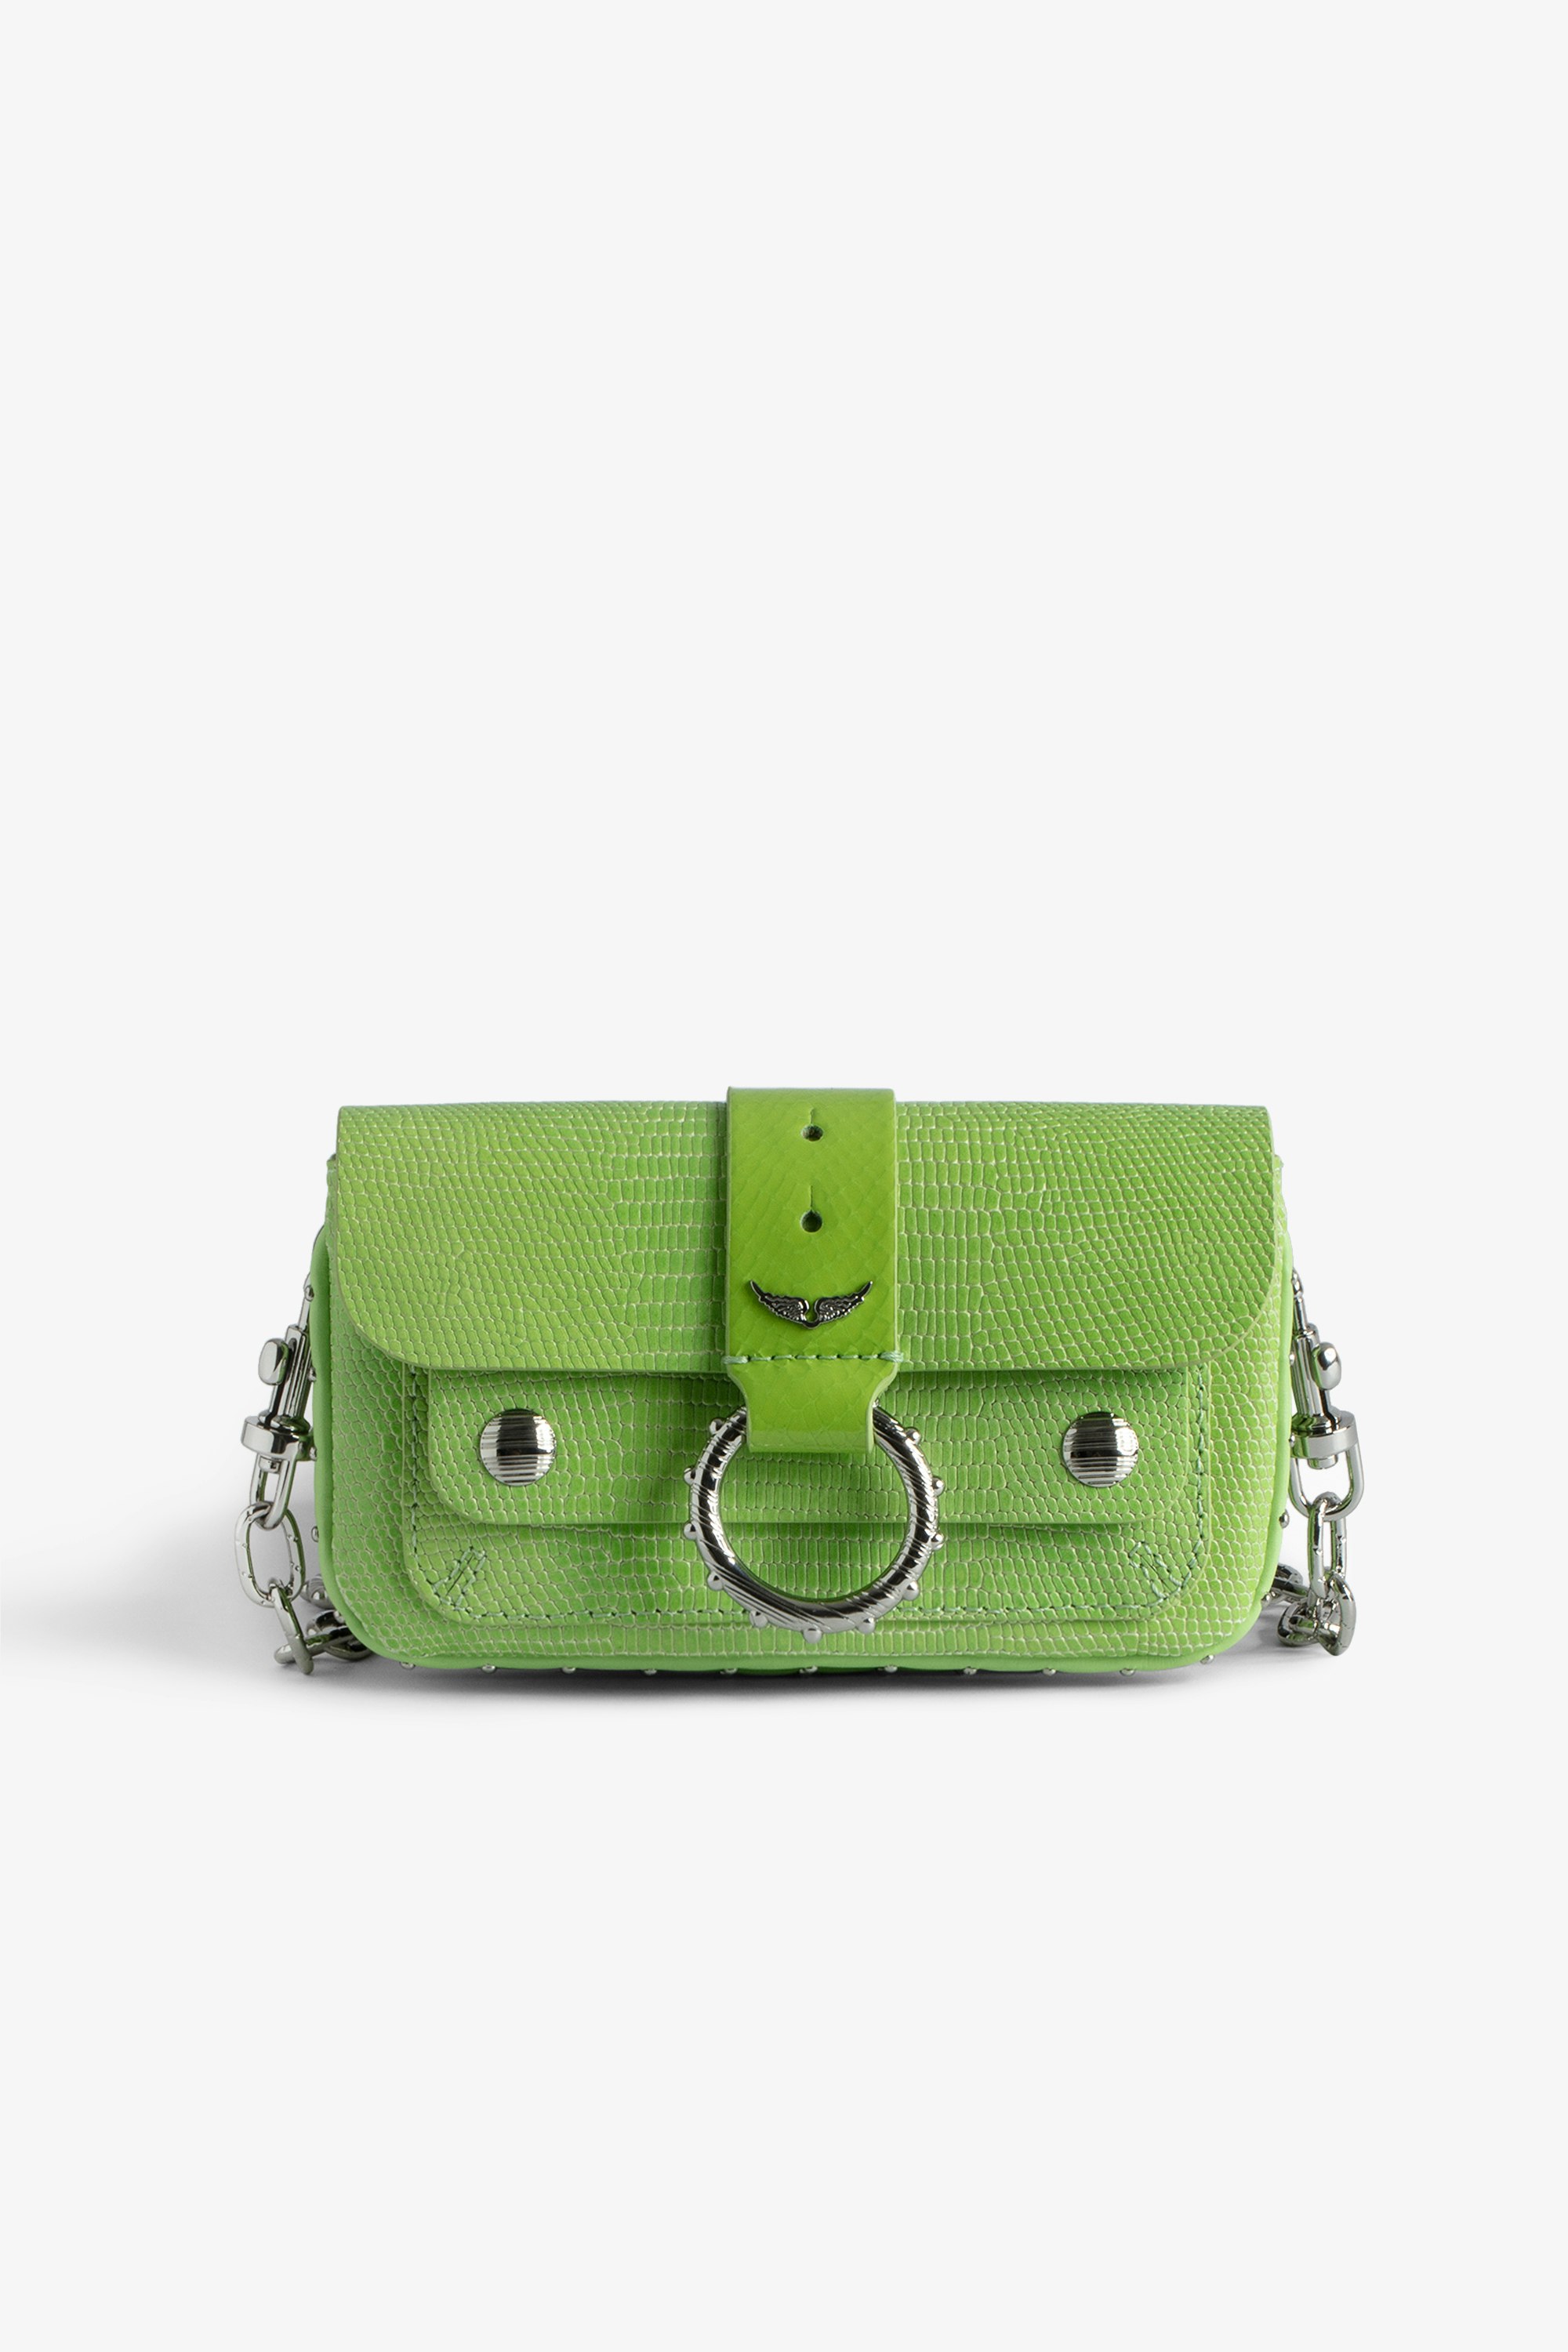 Kate Wallet Glossy Wild Bag - Women’s green iguana-effect patent leather mini bag with metal chain.